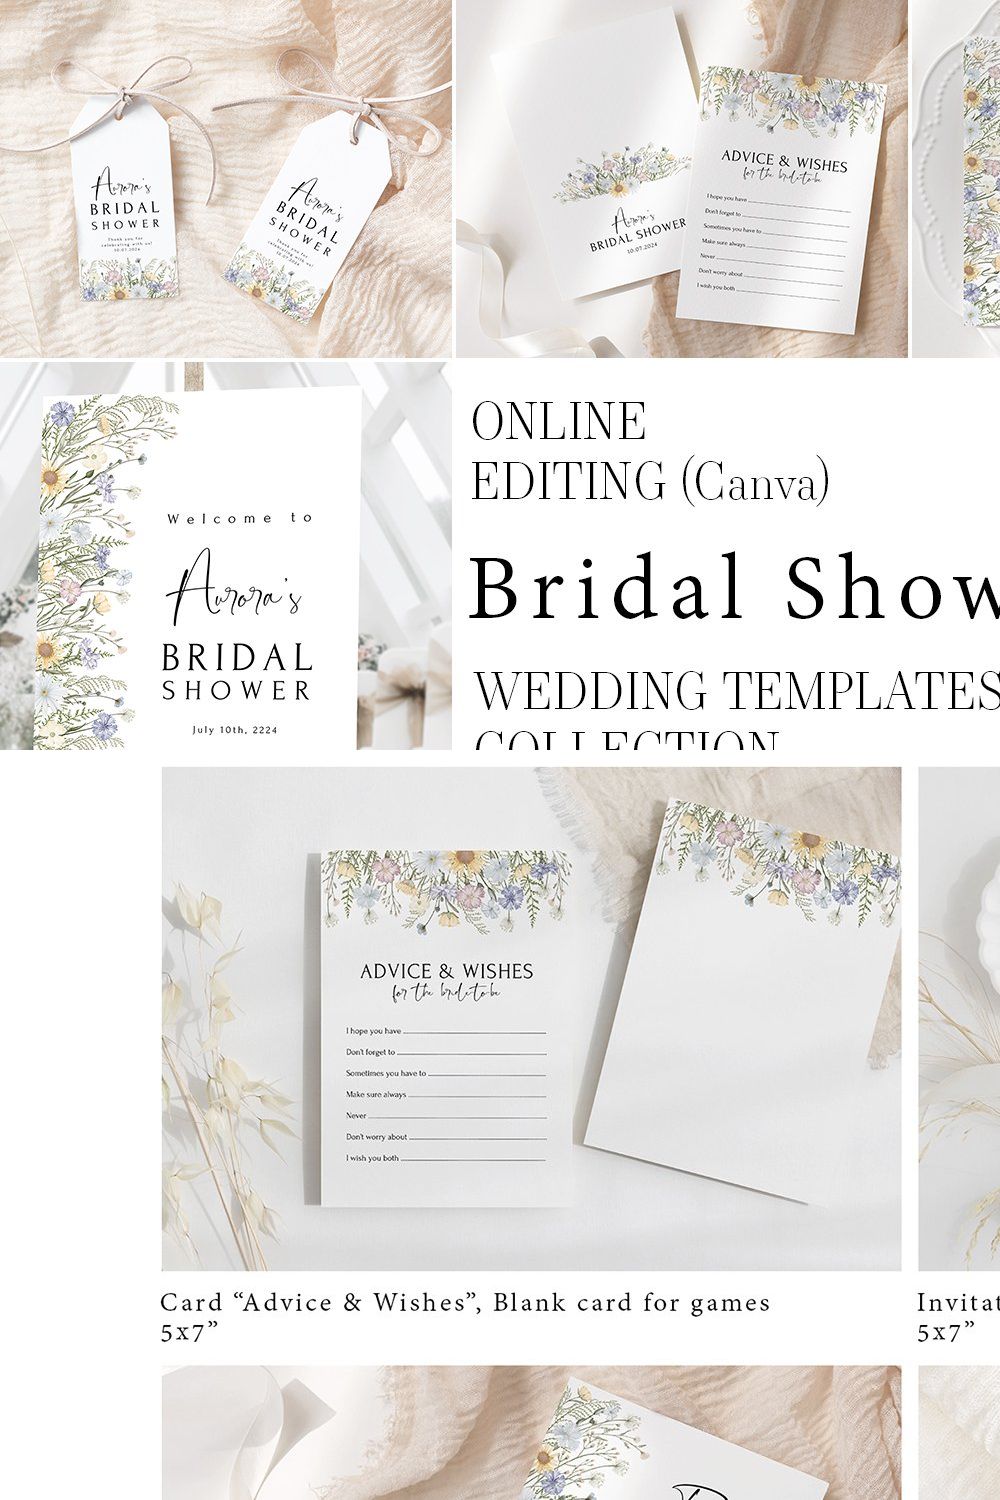 Wildflower Bridal Shower Templates pinterest preview image.